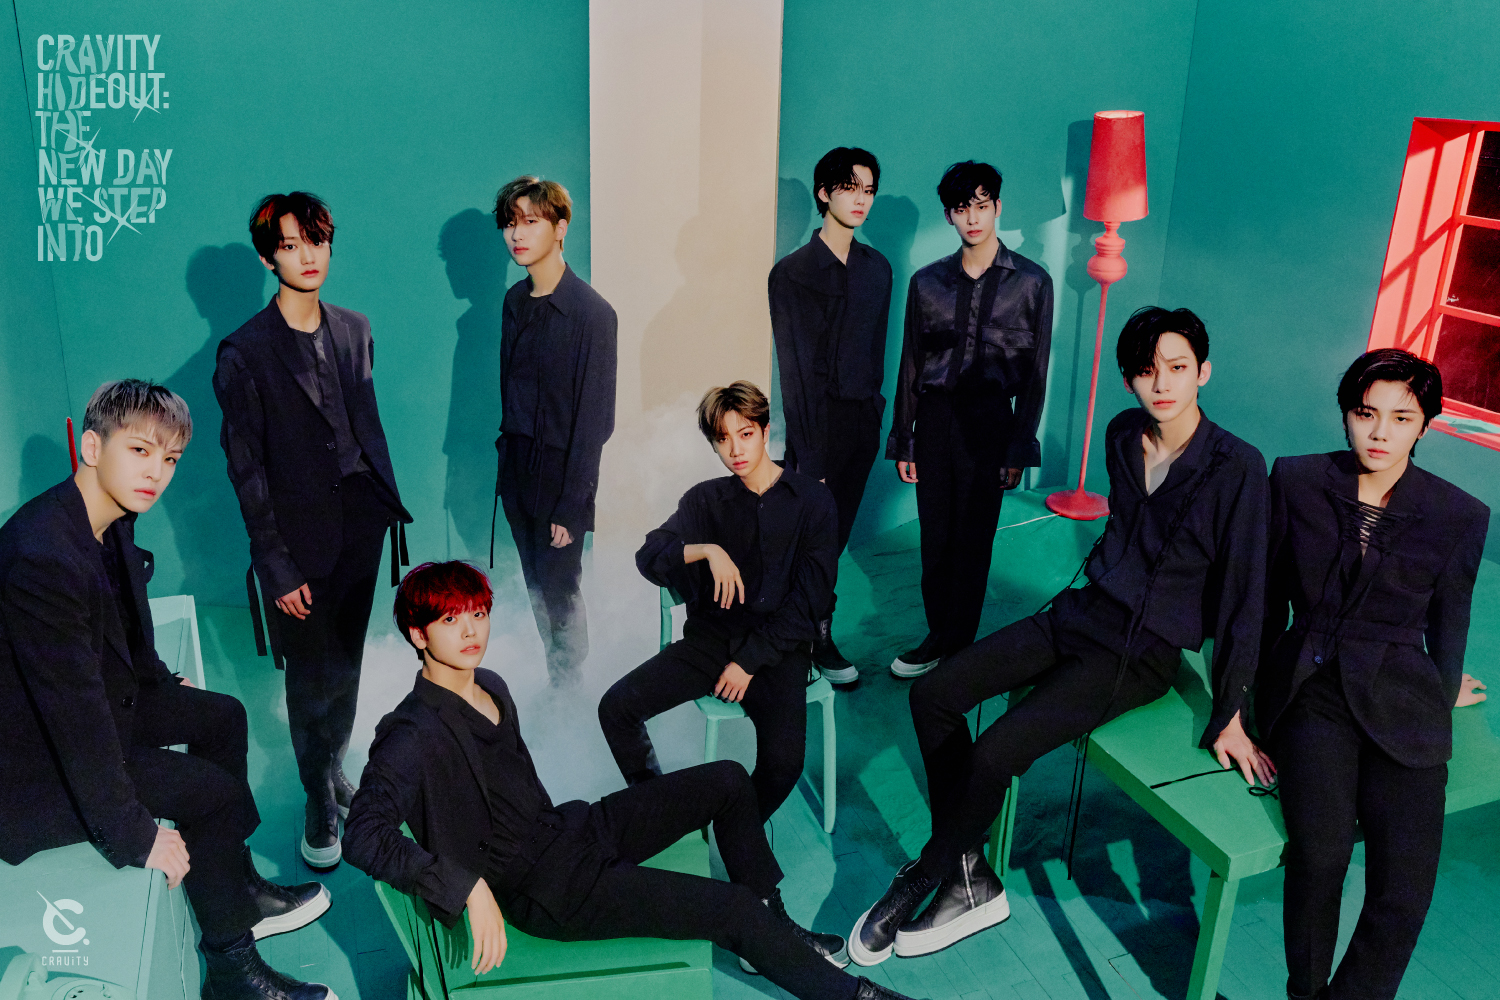 Group Cravity (CRAVITY) unveiled its concept photo ahead of the release of its new Mini album The New Balance Day Step Into at 6 p.m. on the 24th Days.Starship Entertainment (Starship) announced on the official SNS channel of Cravity at 9 pm on the 13th, Cravity Season 2.[HydeIn-N-Out Burger: The New Balance Day Step Into (CRAVITY SEASON2.[HIDEOUT: THE NEW DAY WE STEP INTO]], the first group and unit concept photo were posted sequentially, making the comeback heat even hotter.Cravity in the public photo is posing with chic eyes as if it is casually dressed in all black and navy color suits for each personality in a subtle fog based on the background of the turquoise color.The addition of charisma to the charm of each mature Cravity individual focuses attention on the comeback by itself, raising the curiosity of fans about this activity concept.Meanwhile, Cravity (Serim, Edgar Allan Poe, Chungmo, Woobin, Wonjin, Minhee, Hyung Joon, Taeyoung, and Sungmin) proved to be a super rookie by winning the Shinhan Ryu Soribada Rookie Award at the 2020 Soribada Awards held on the 13th. -N-Out Burger: The New Balance Day Step Into (CRAVITY HIDEOUT: THE NEW DAY WE STEP INTO) will be released, and the trend will continue with the title song Plame.iMBC  Photo Starship